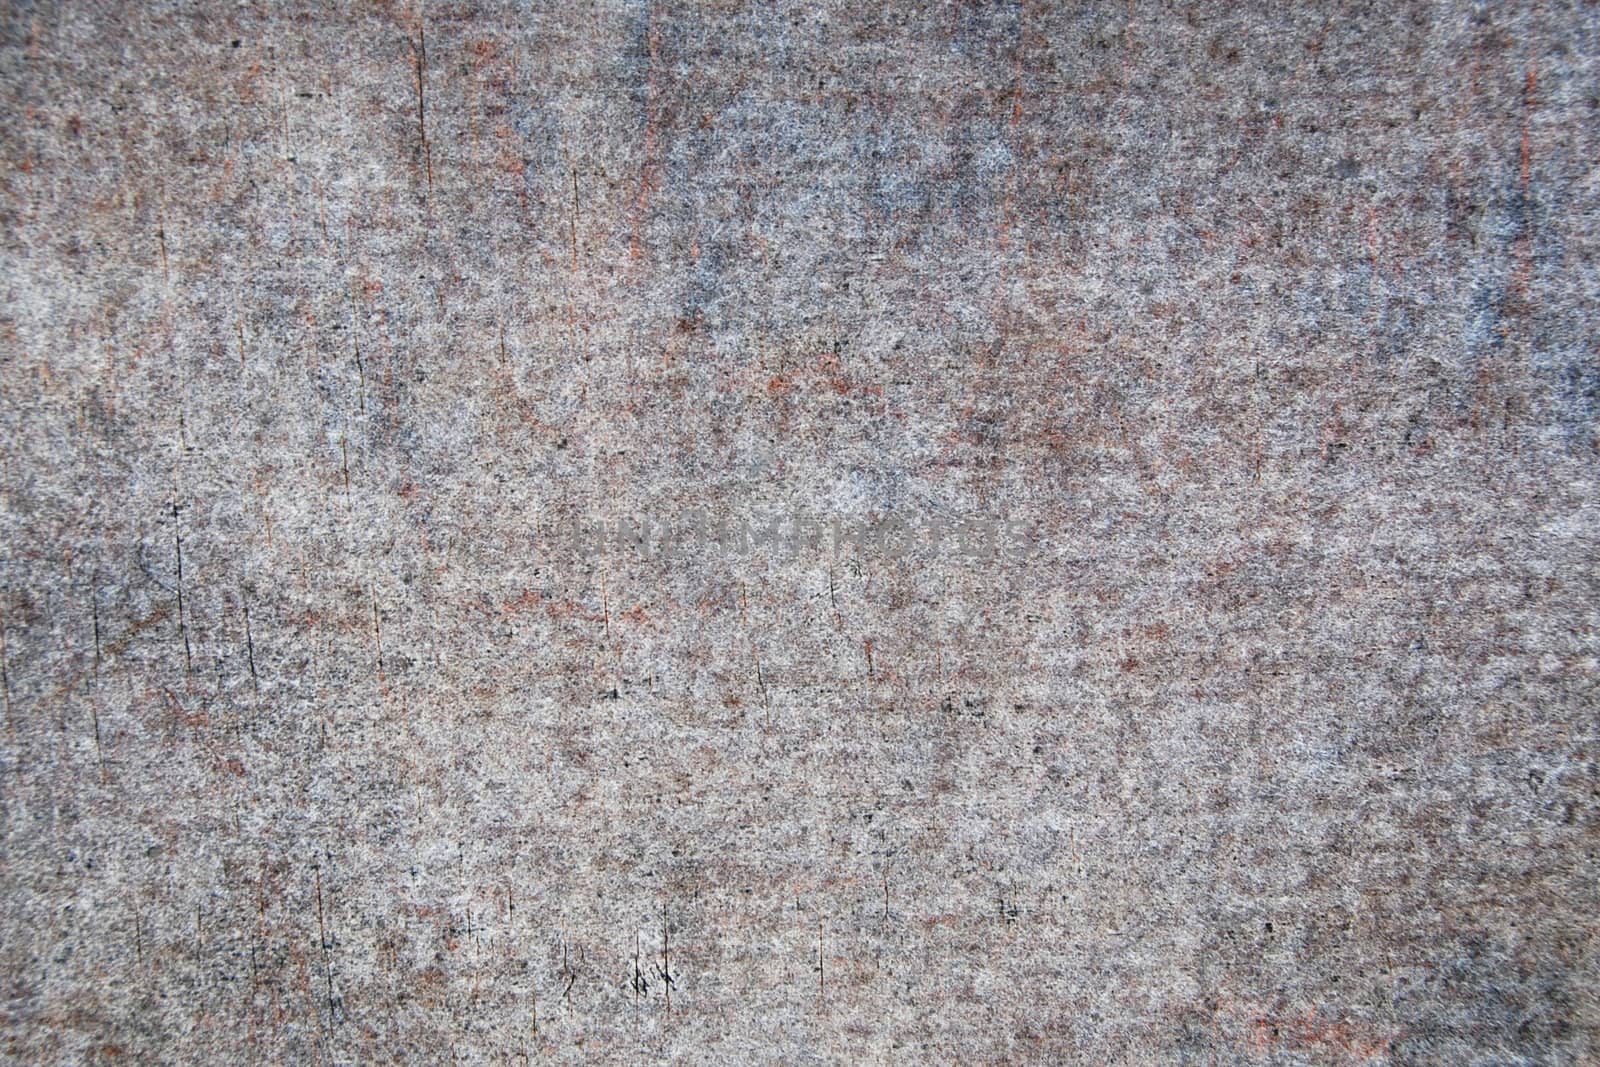 Grunge wooden aged material background